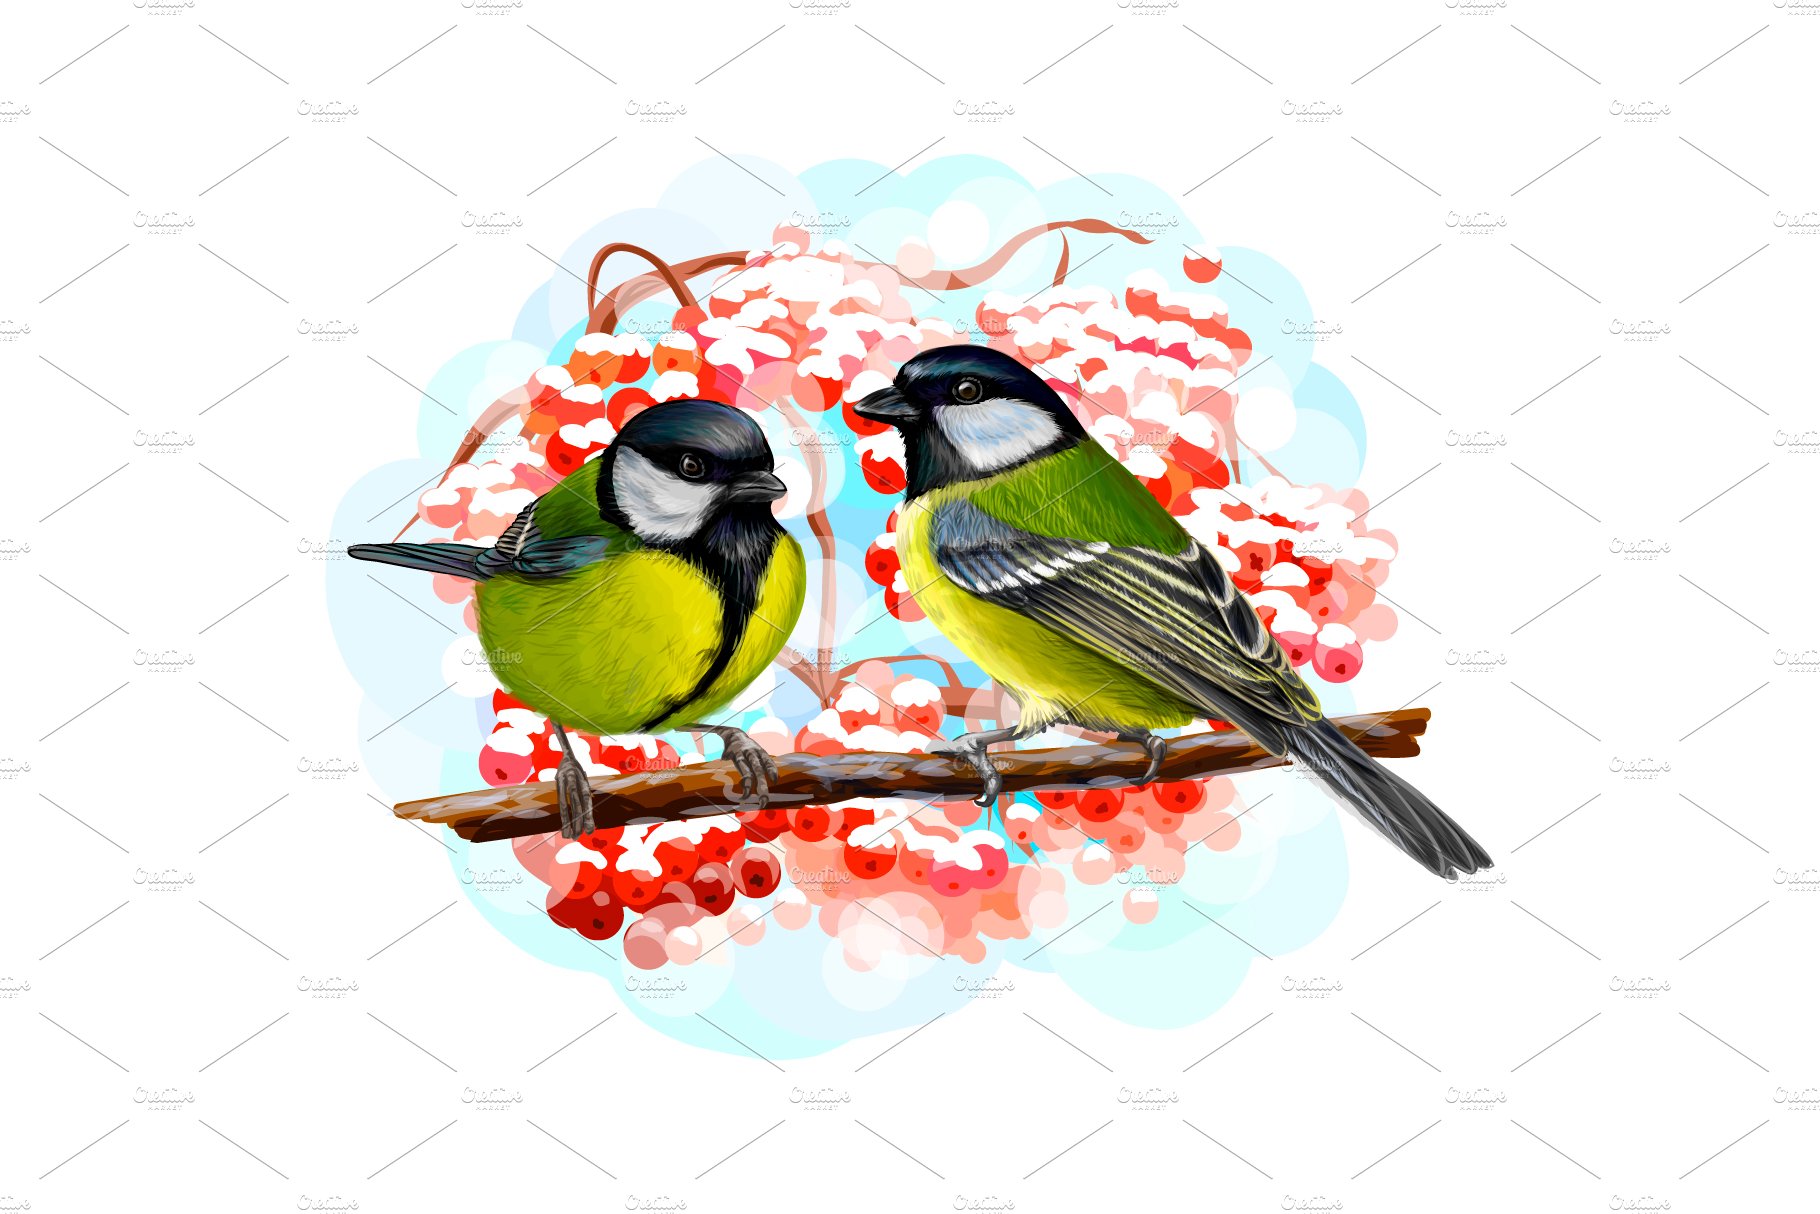 Tit birds sitting on a branch cover image.